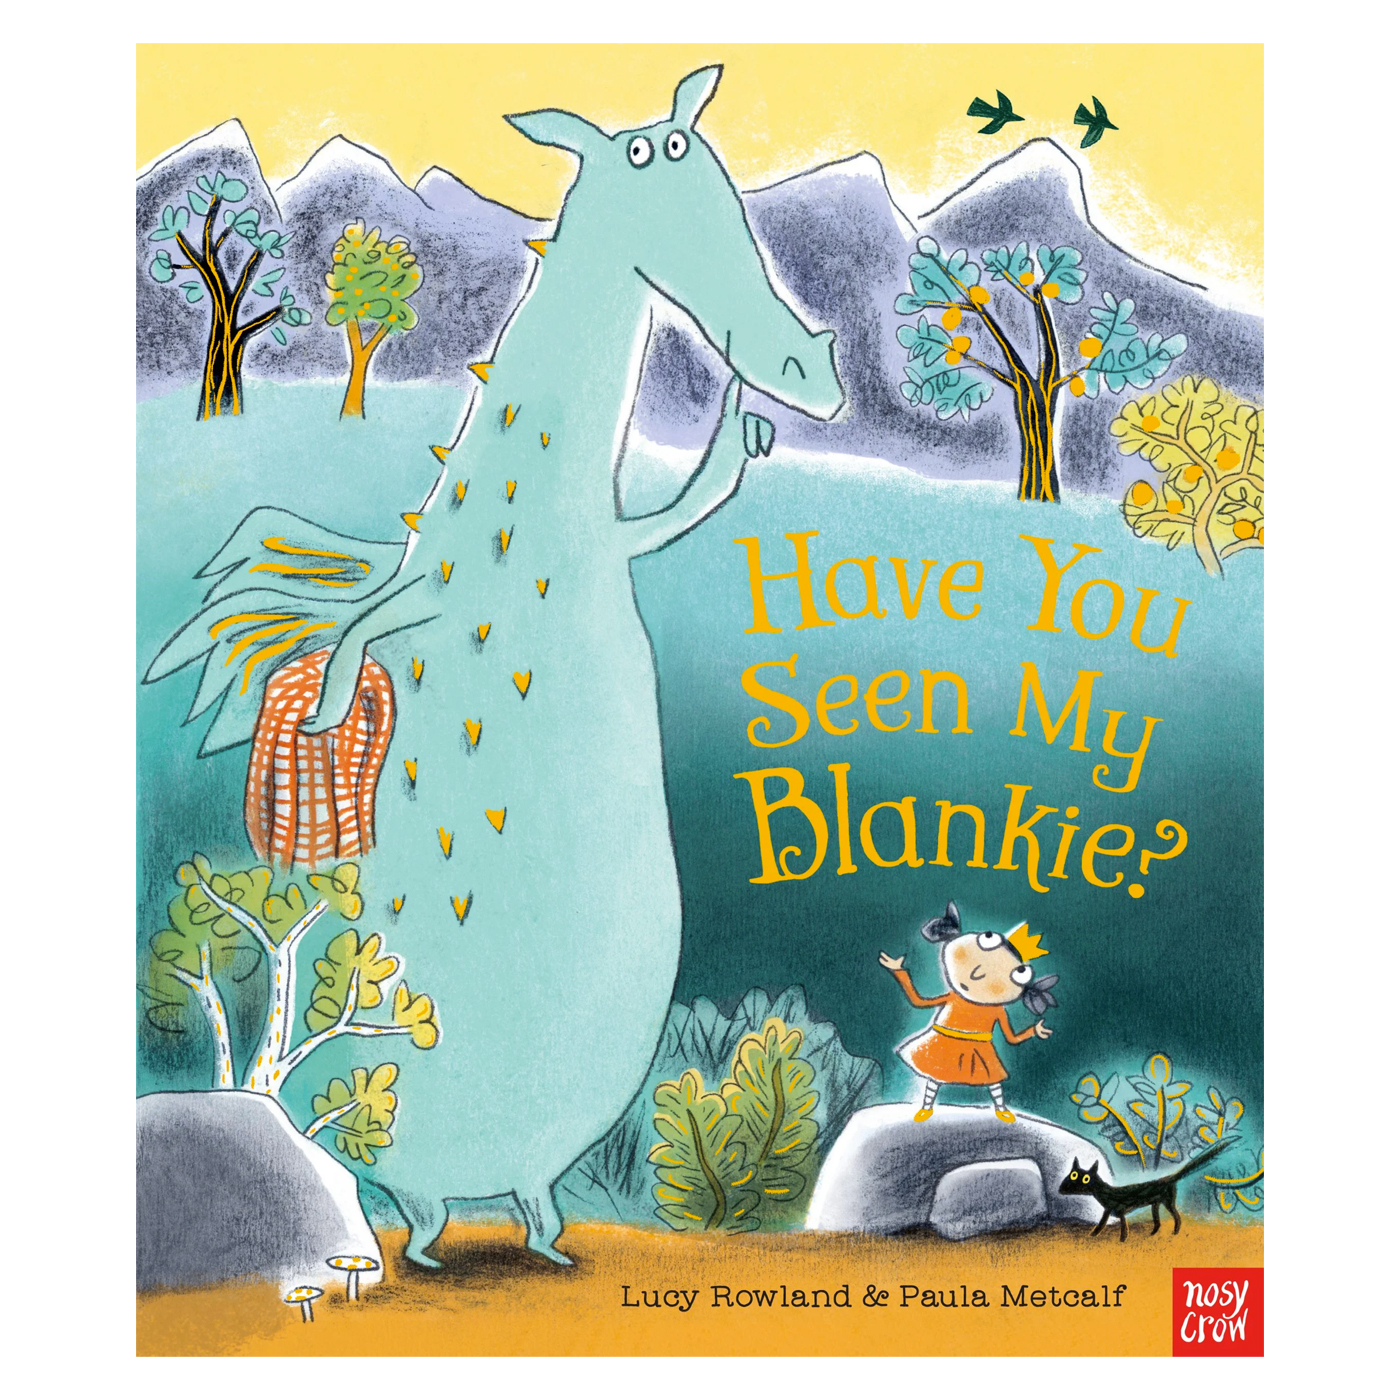 NOSY CROW Have You Seen My Blankie?